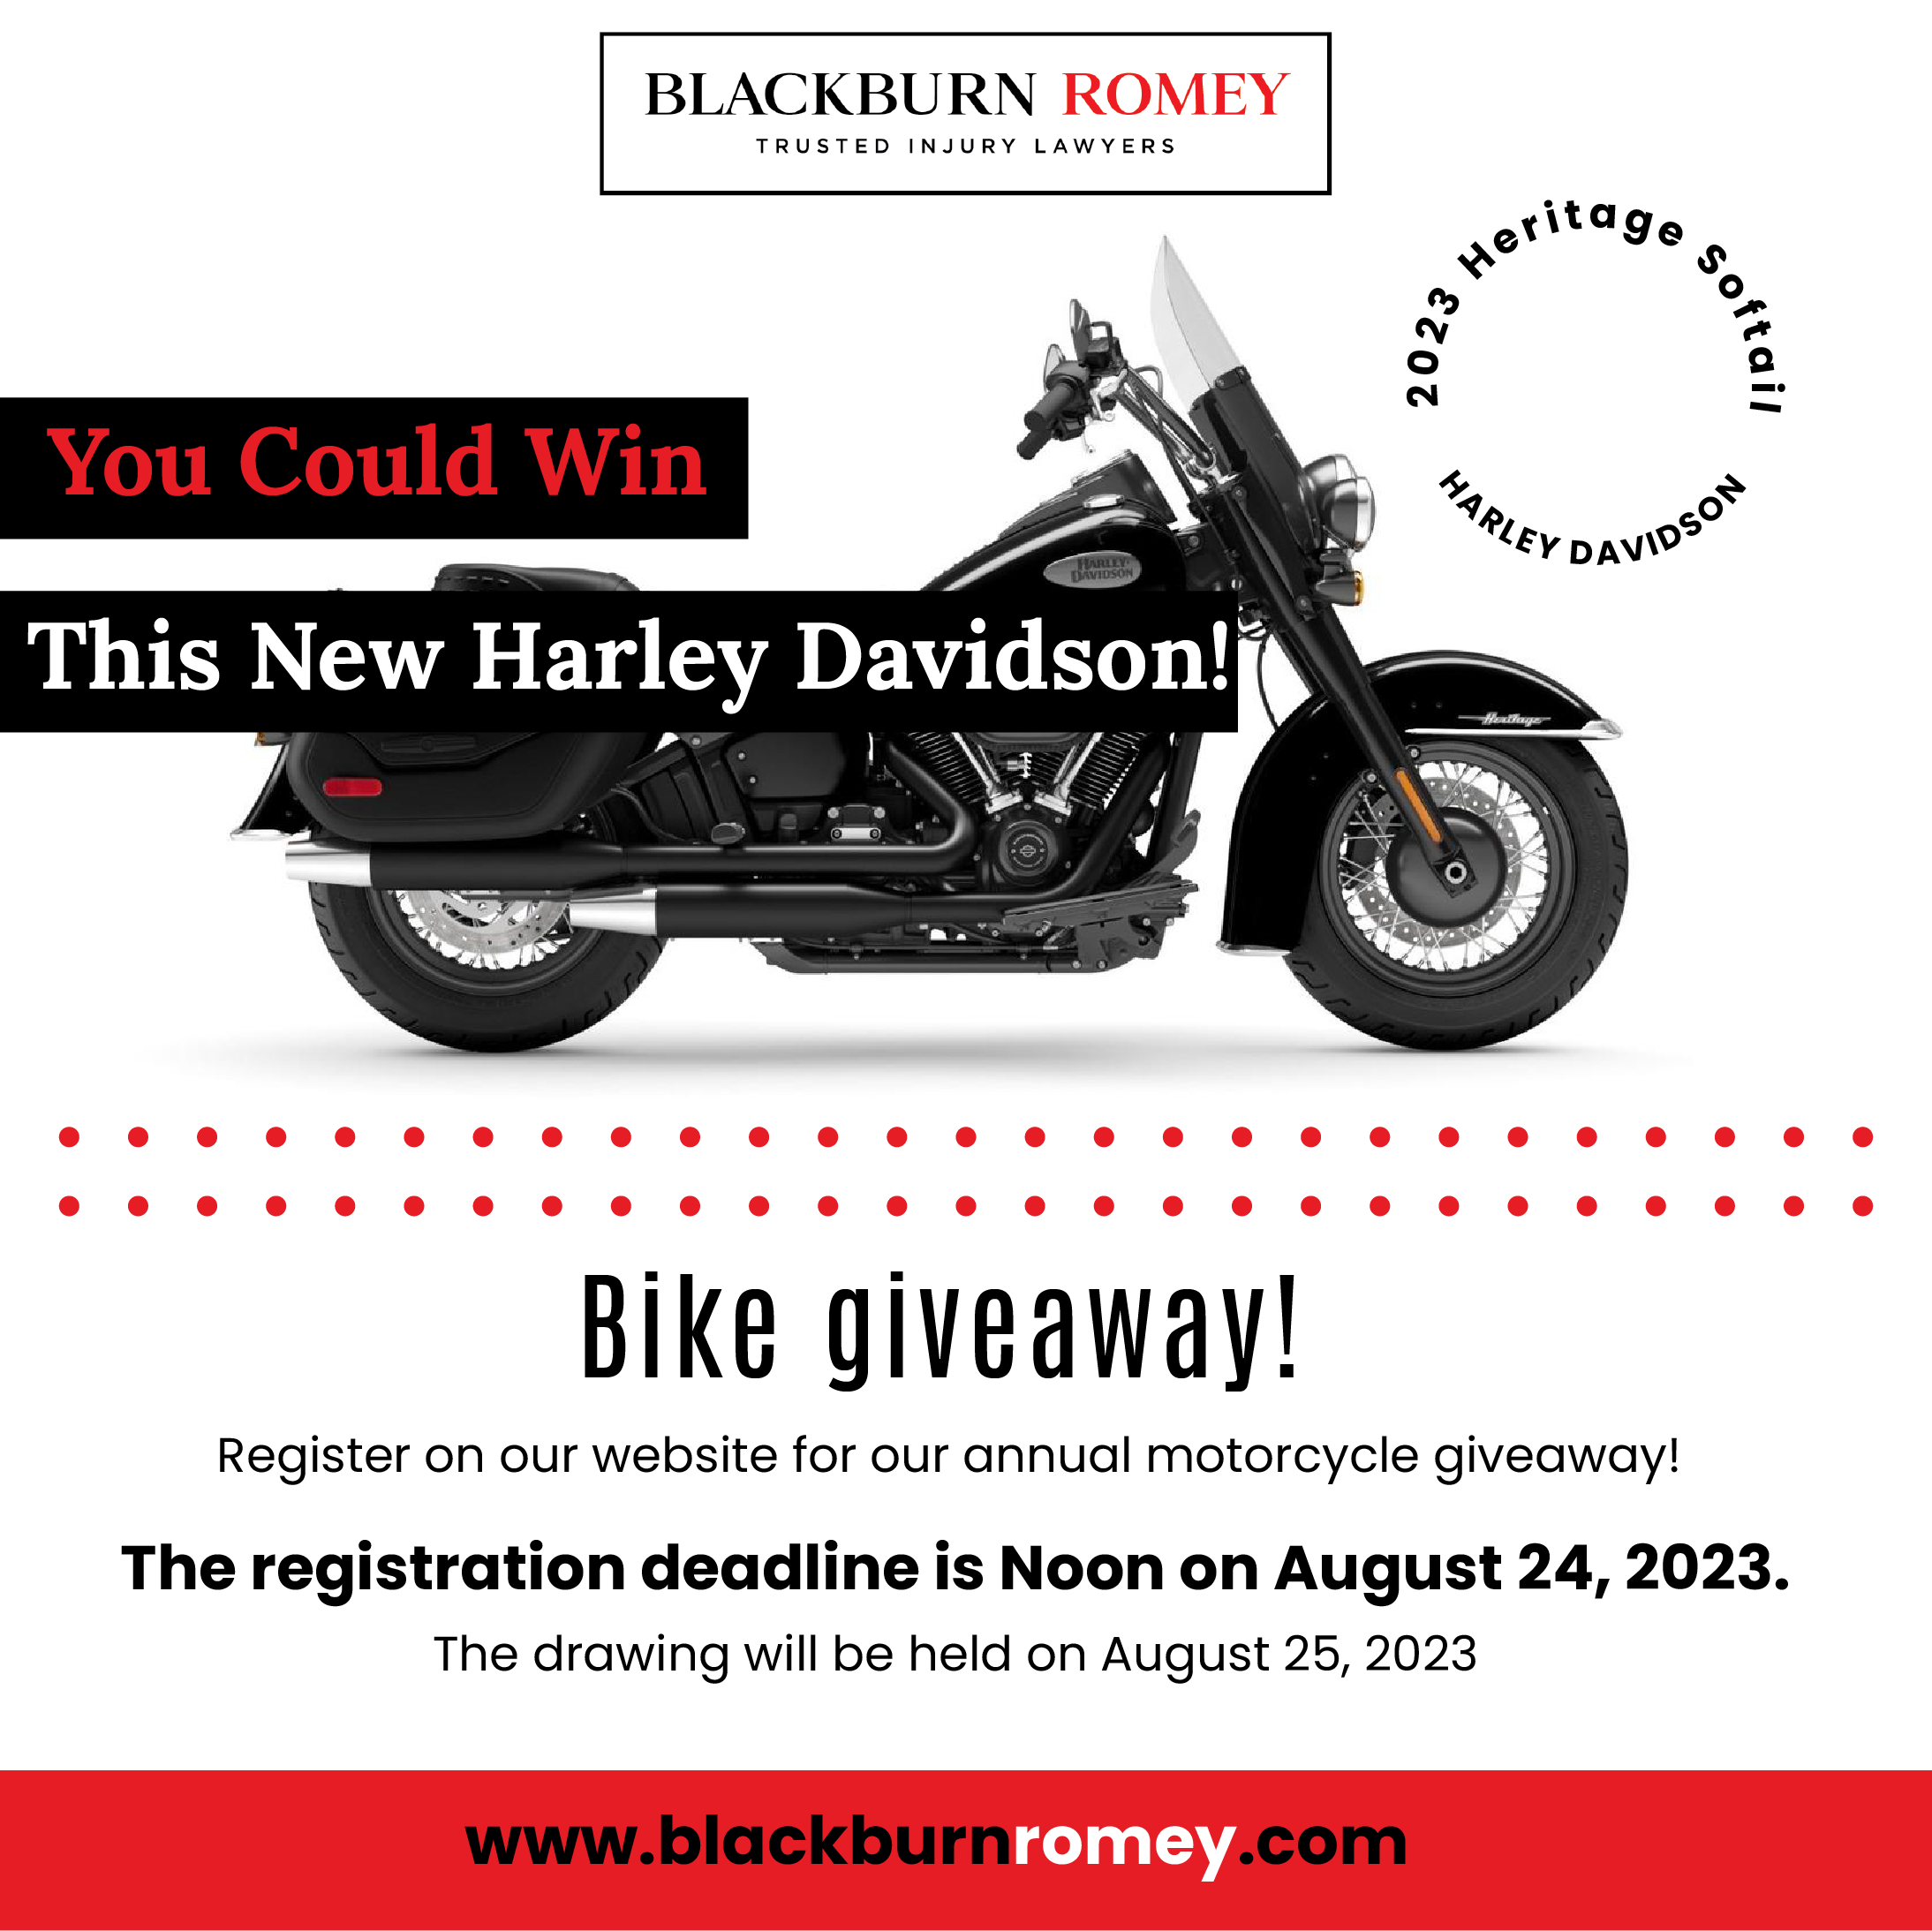 Rev Up Engines Blackburn Romey Unveils Motorcycle Giveaway for 2023